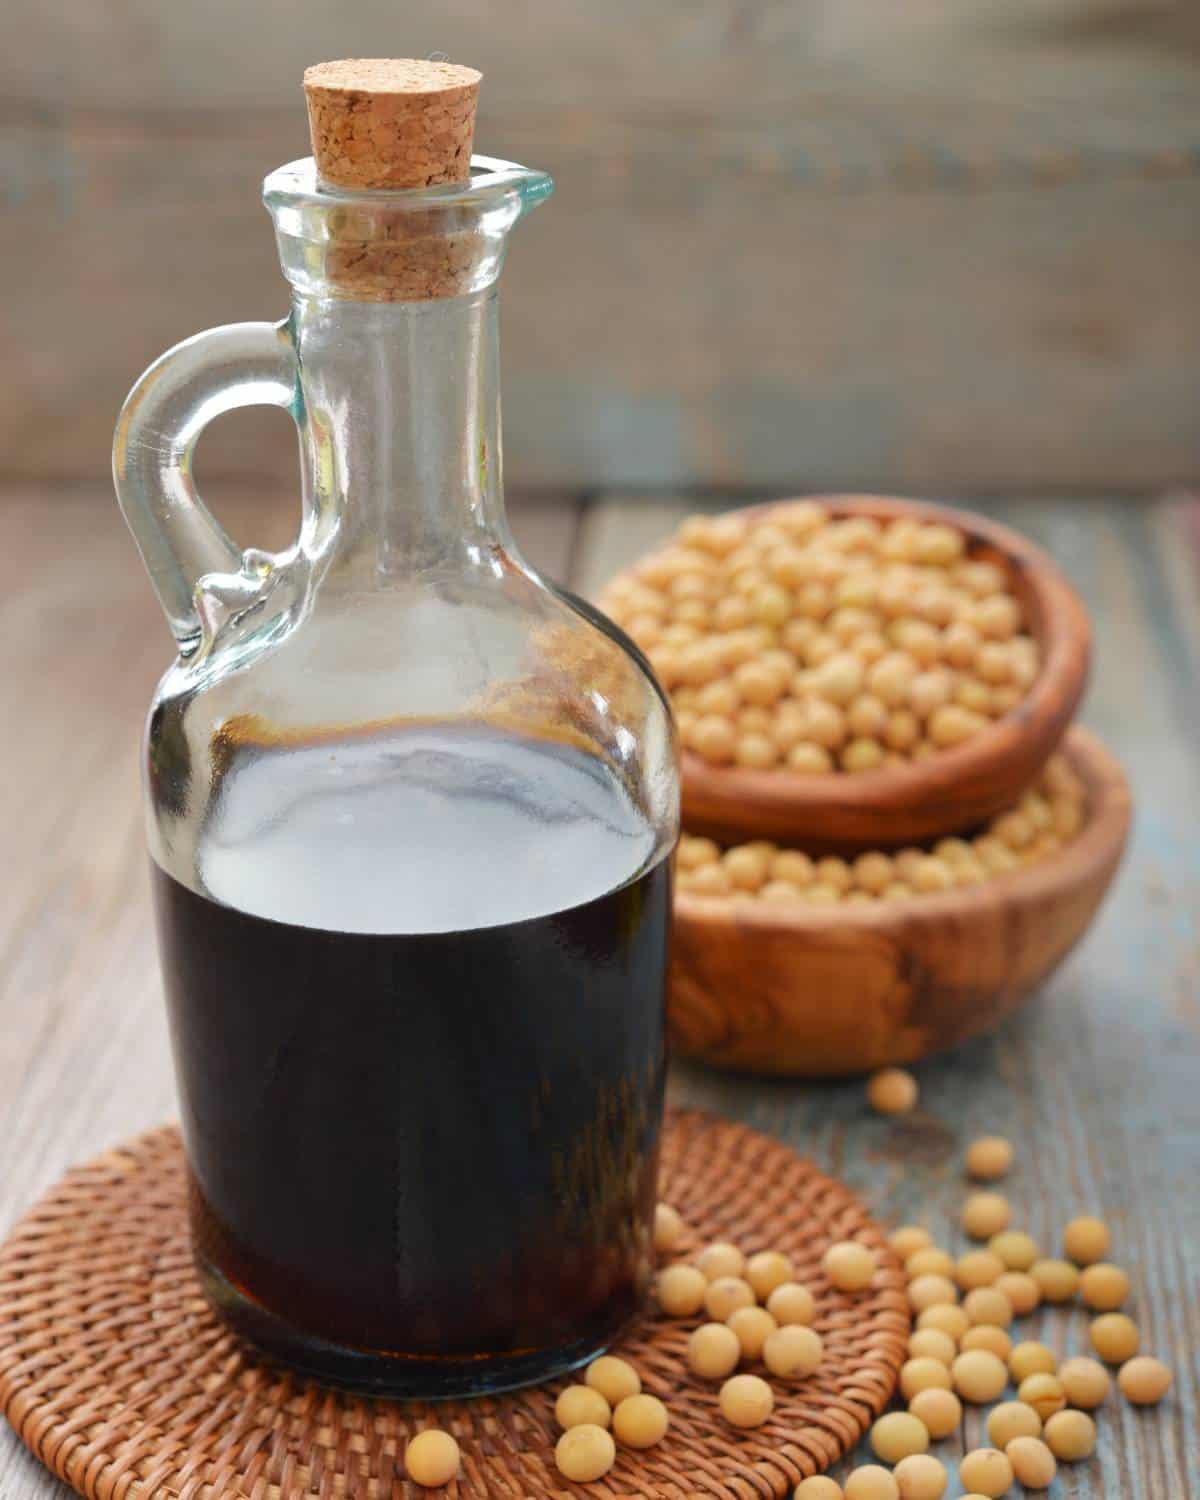 Soy sauce in a glass bottle with a handle and cork, soy beans in the background.